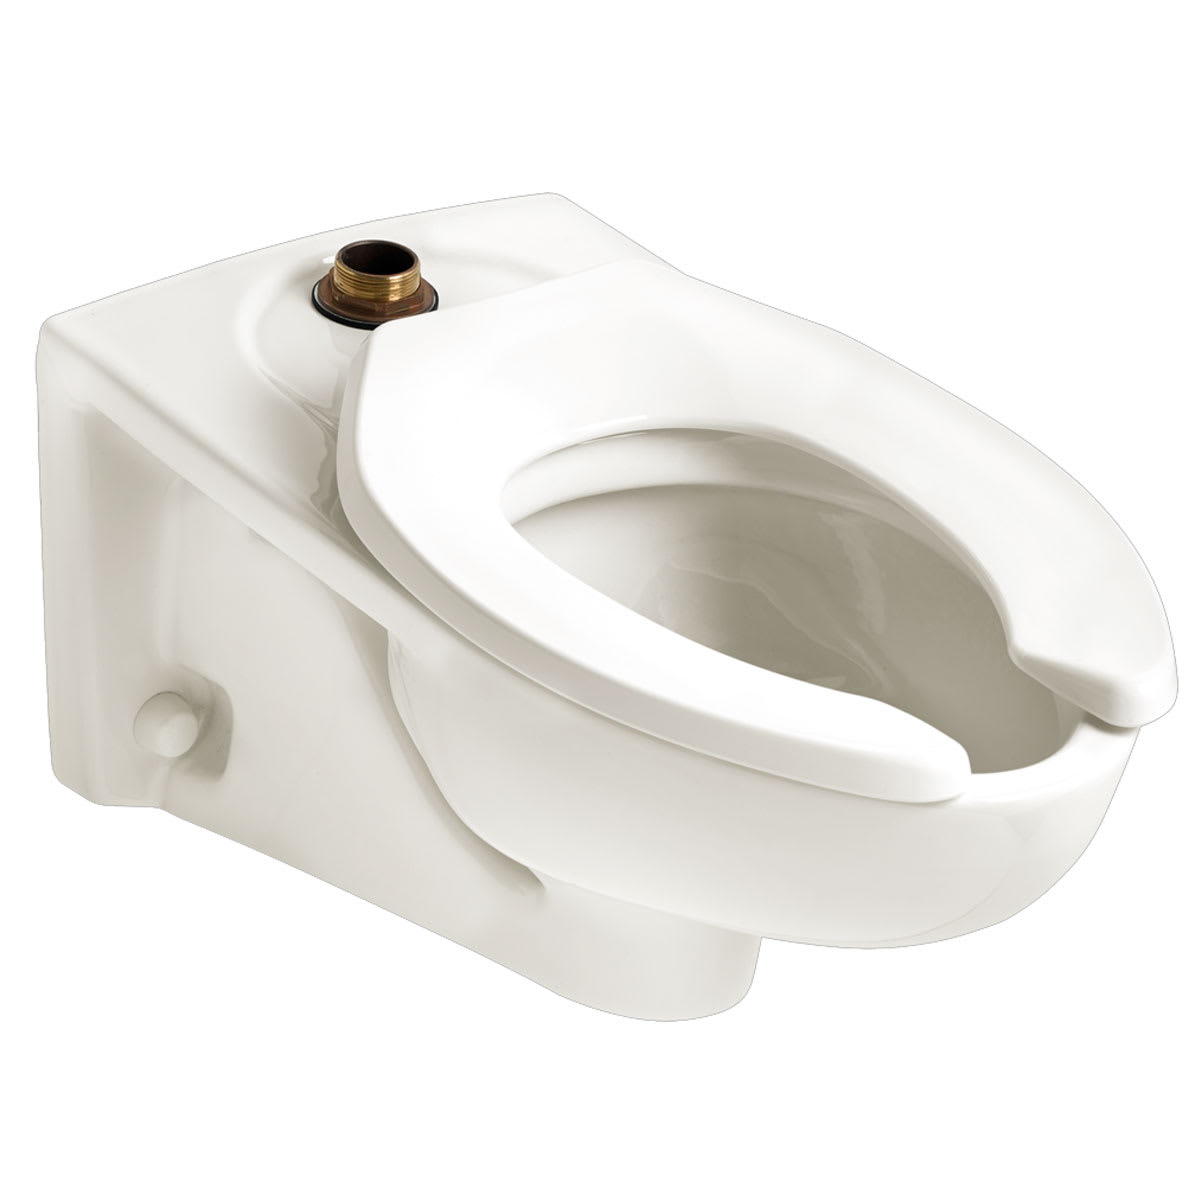 Geest vrouw Senator American Standard 2257.101.020 White Afwall Millennium Elongated Toilet  Bowl Only With Top Spud - Less Seat and Flushometer - FaucetDirect.com